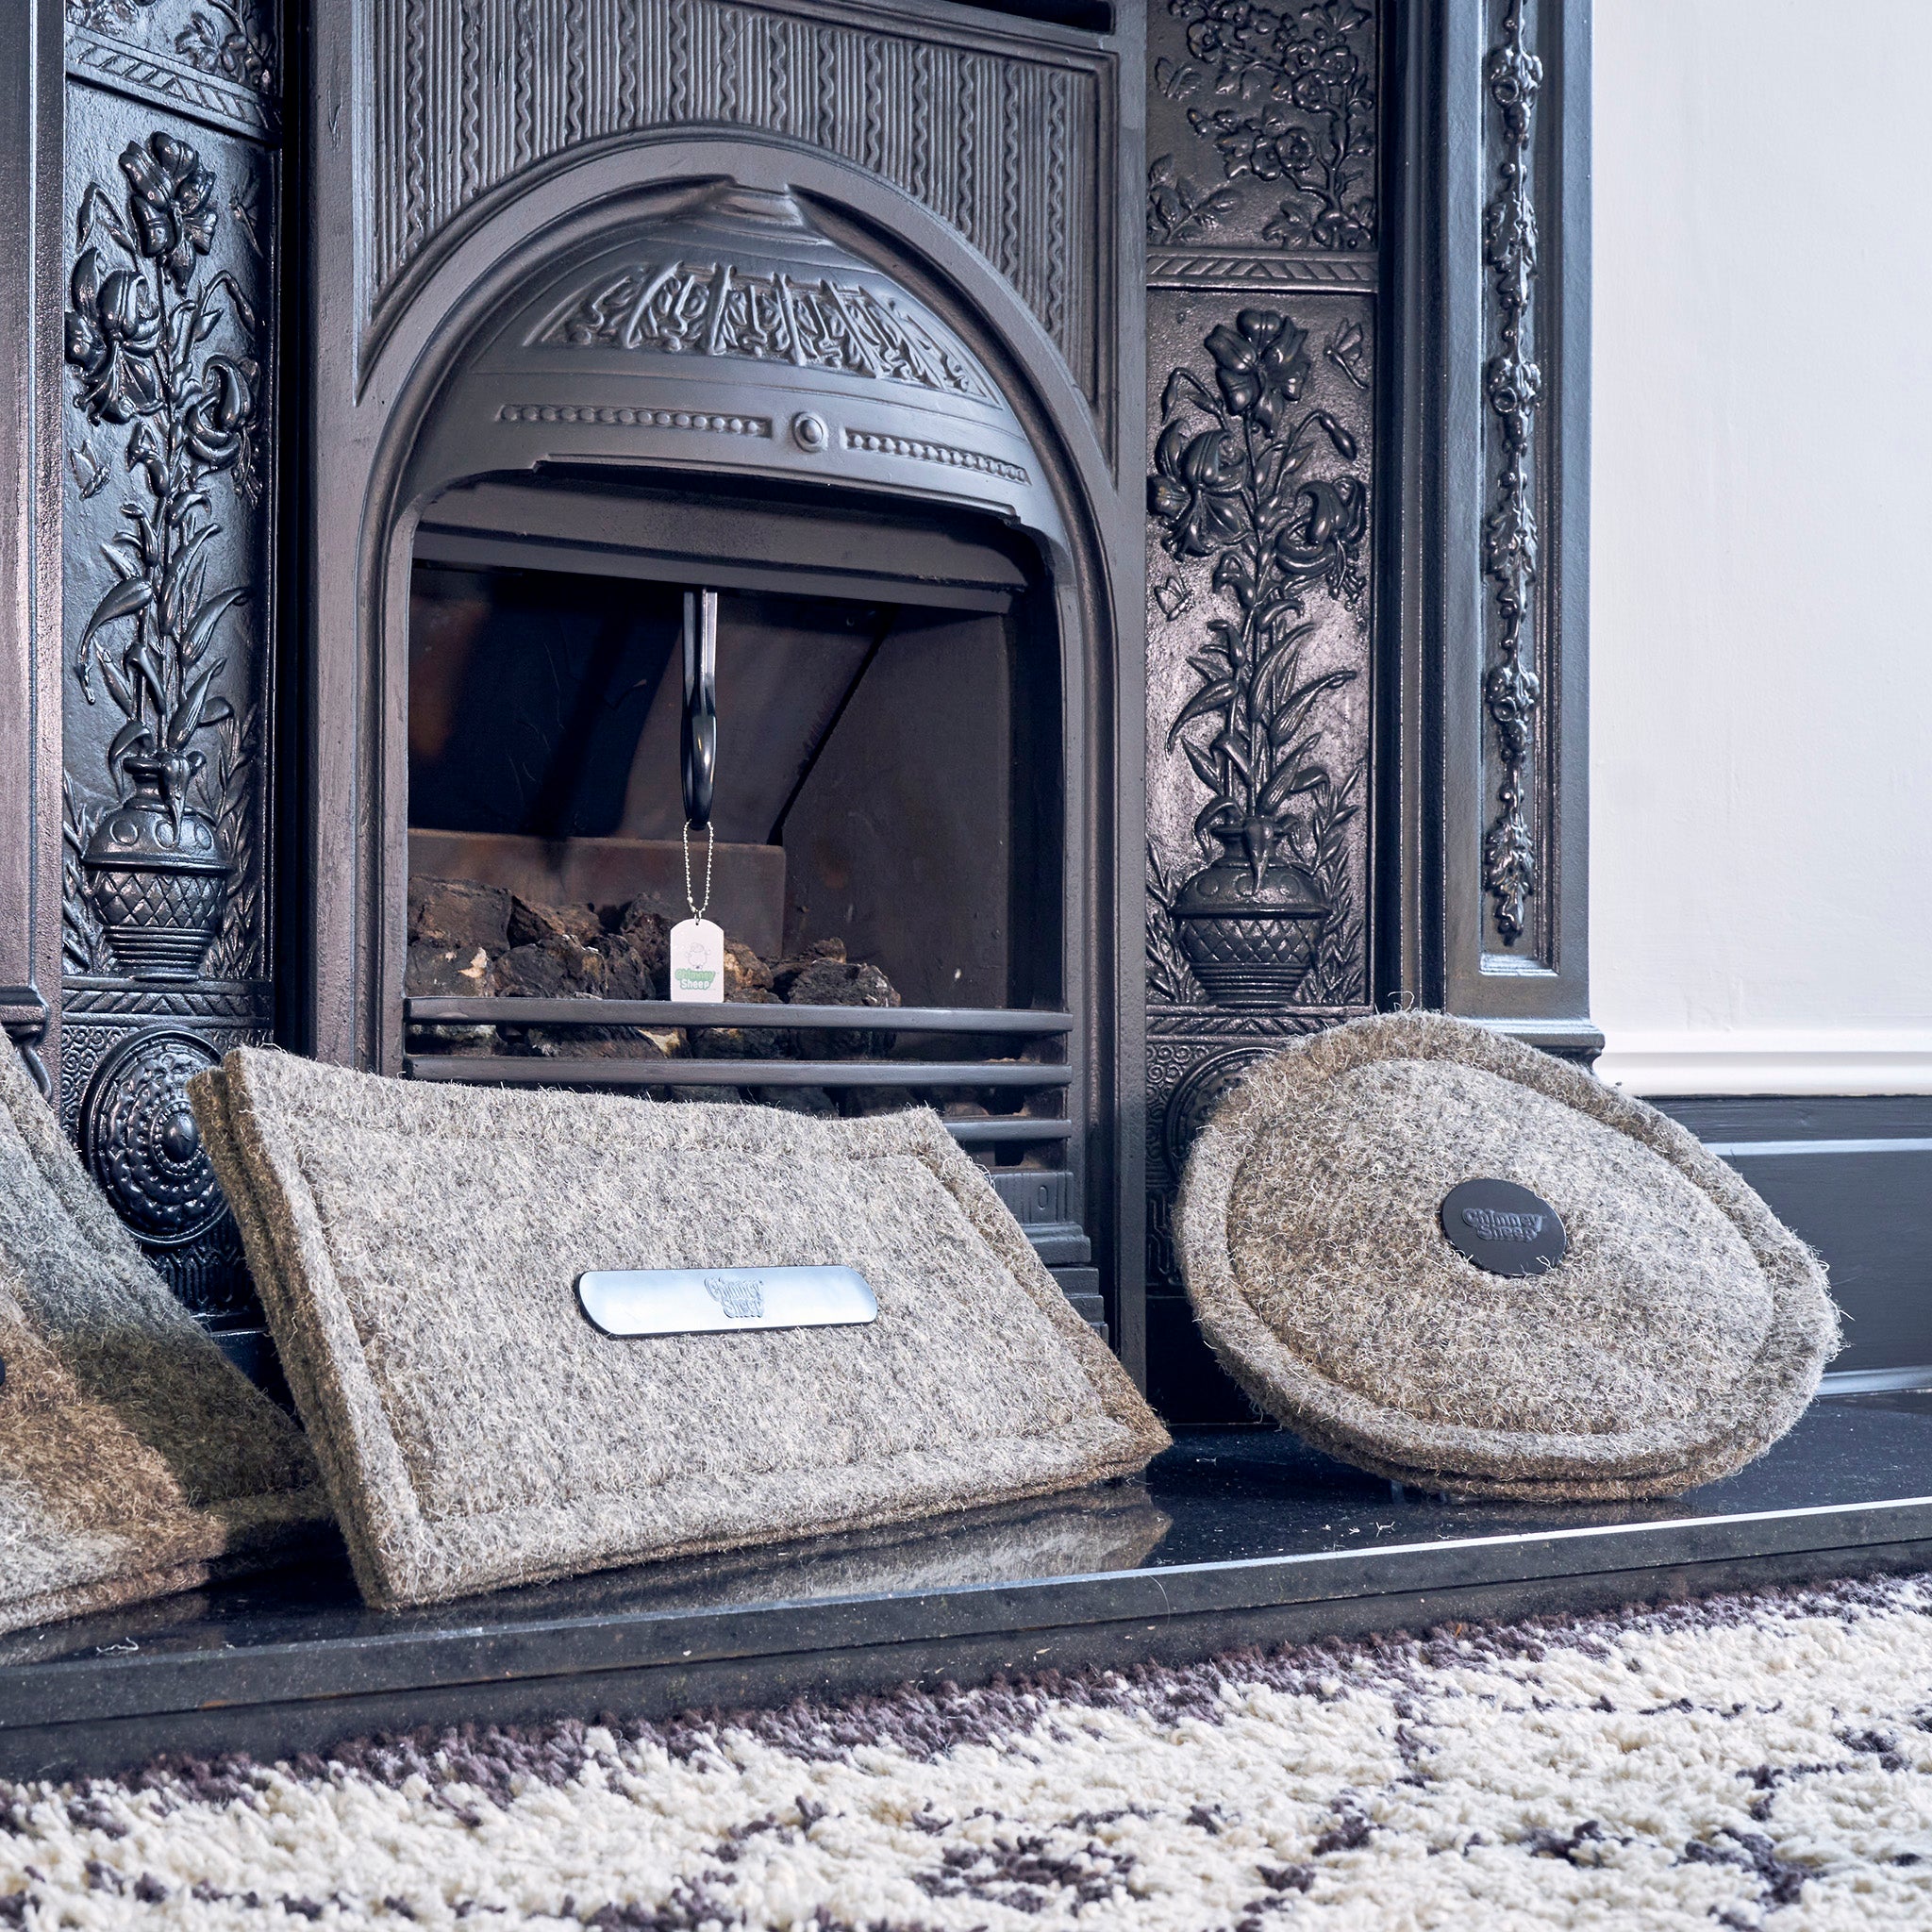 A removable round chimney sheep draught excluder in front of a fireplace